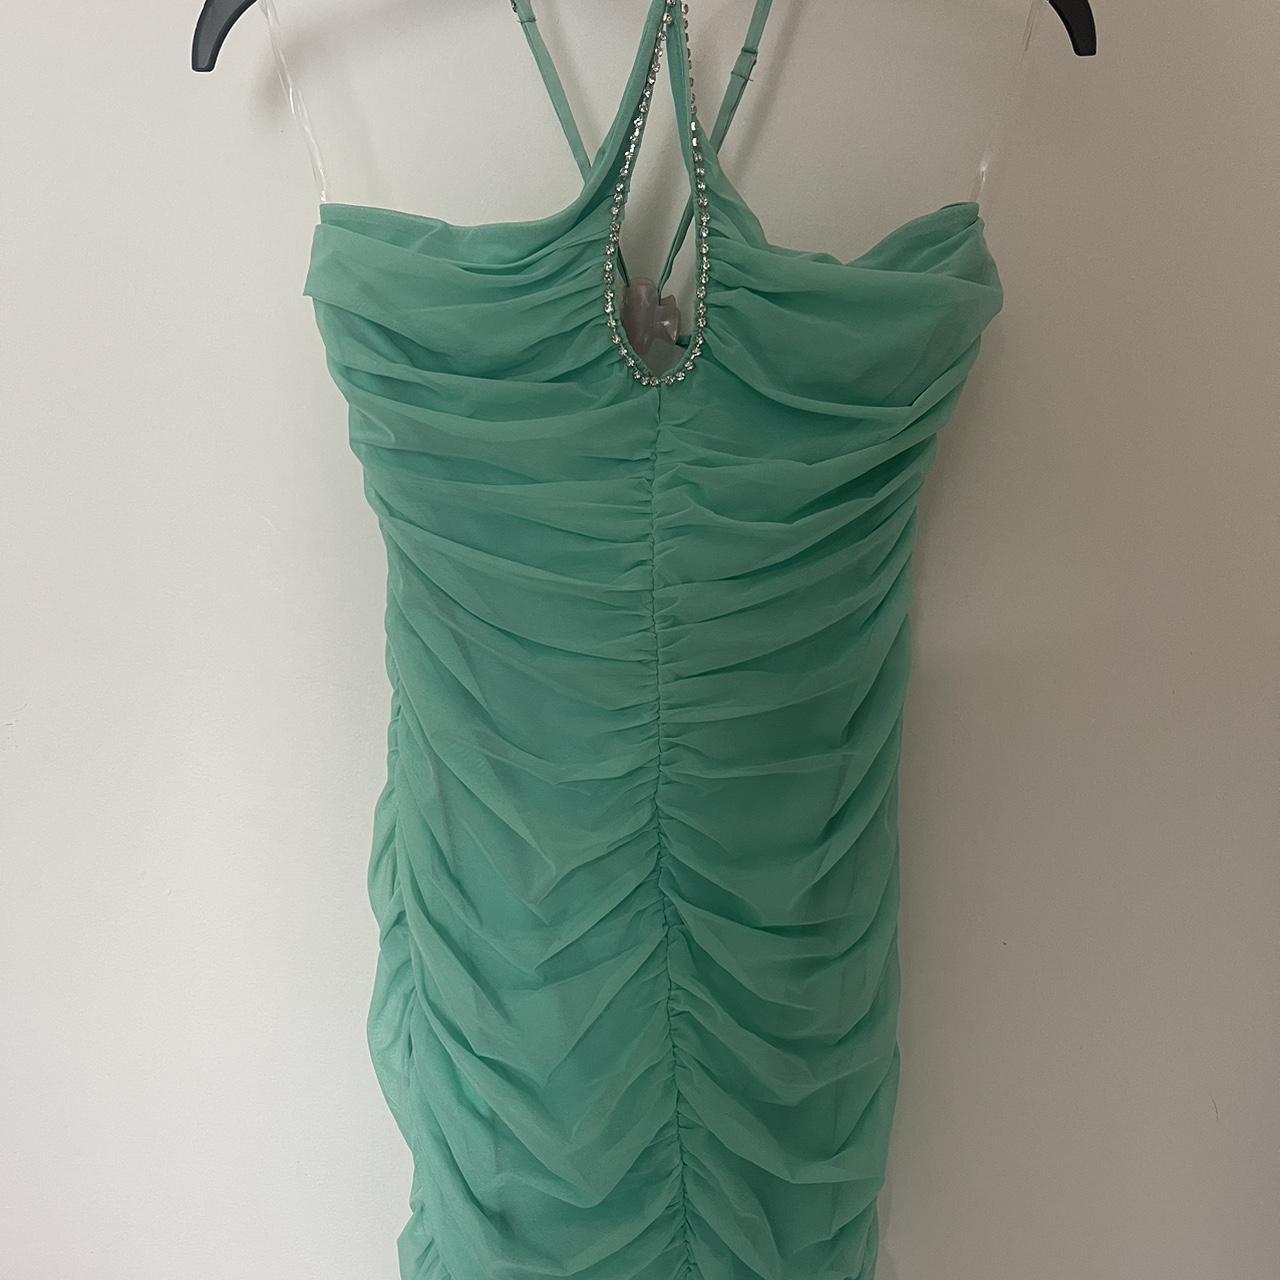 Mint green dress, with gem on the cross straps Oh... - Depop